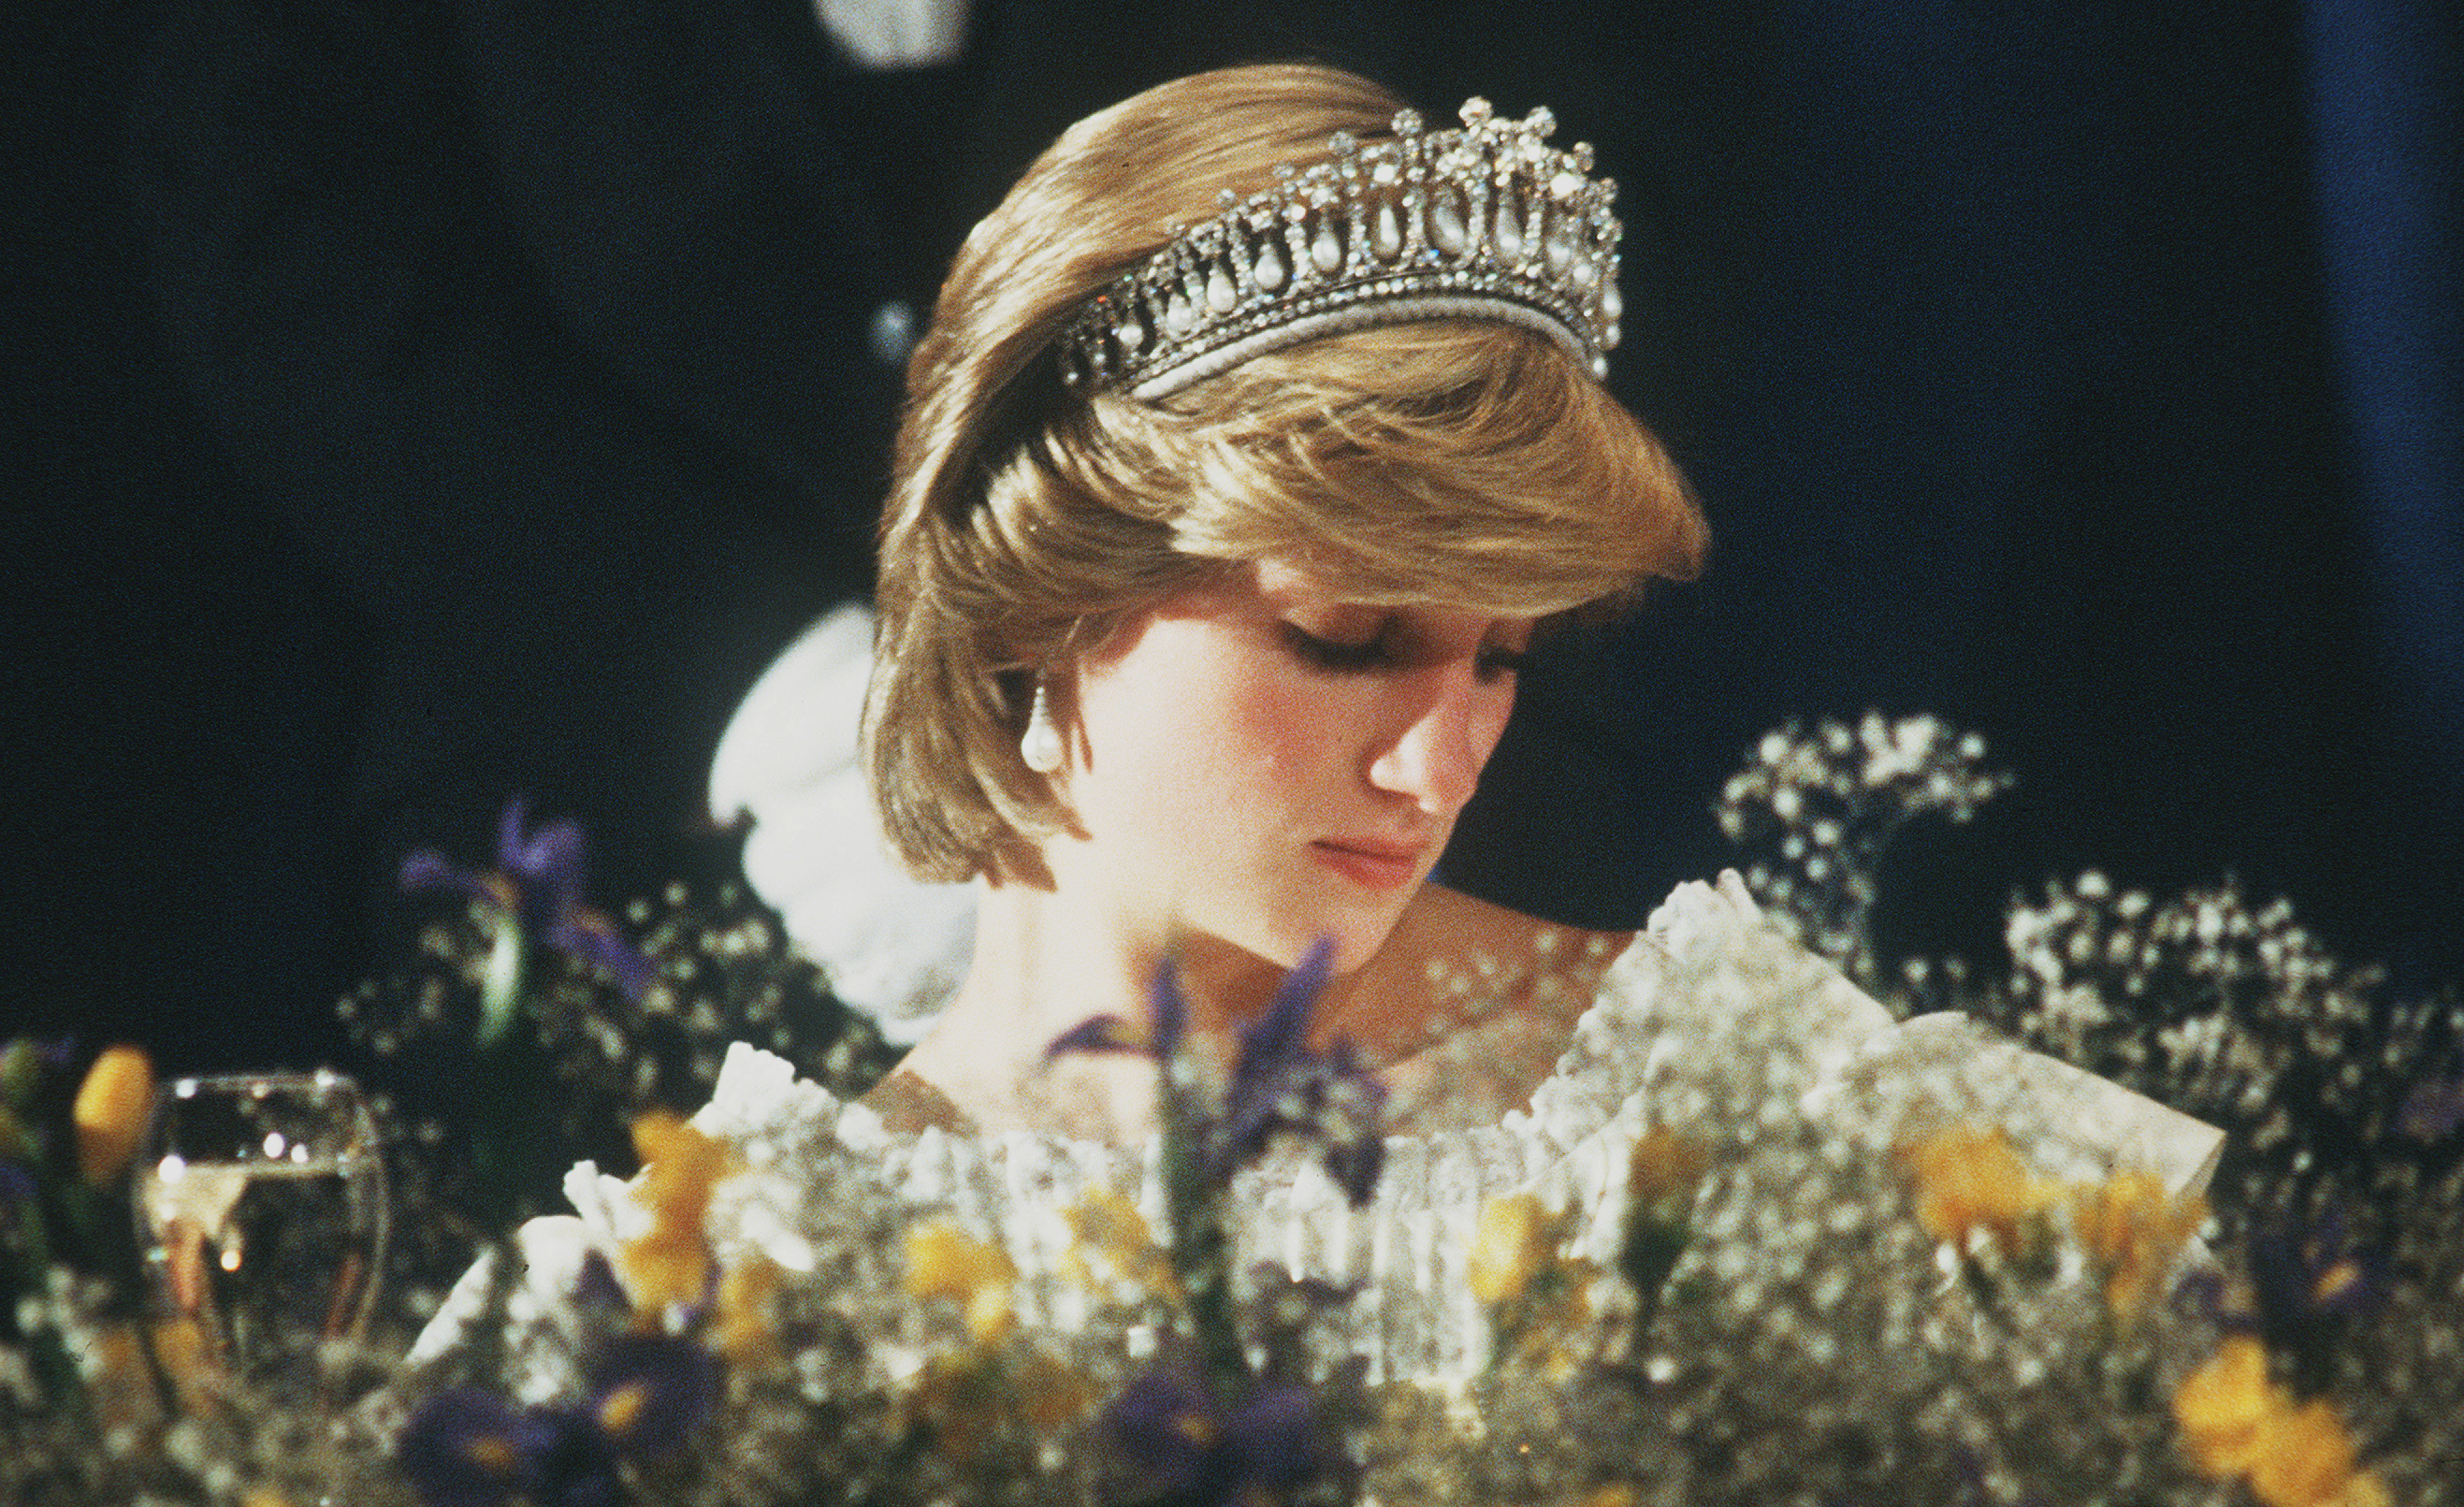 Diana, Princess of Wales wears the Cambridge Lover's Knot tiara (Queen Mary's Tiara) and diamond earrings during a banquet on April 29, 1983 in Aukland, New Zealand. (Anwar Hussein—Getty Images)